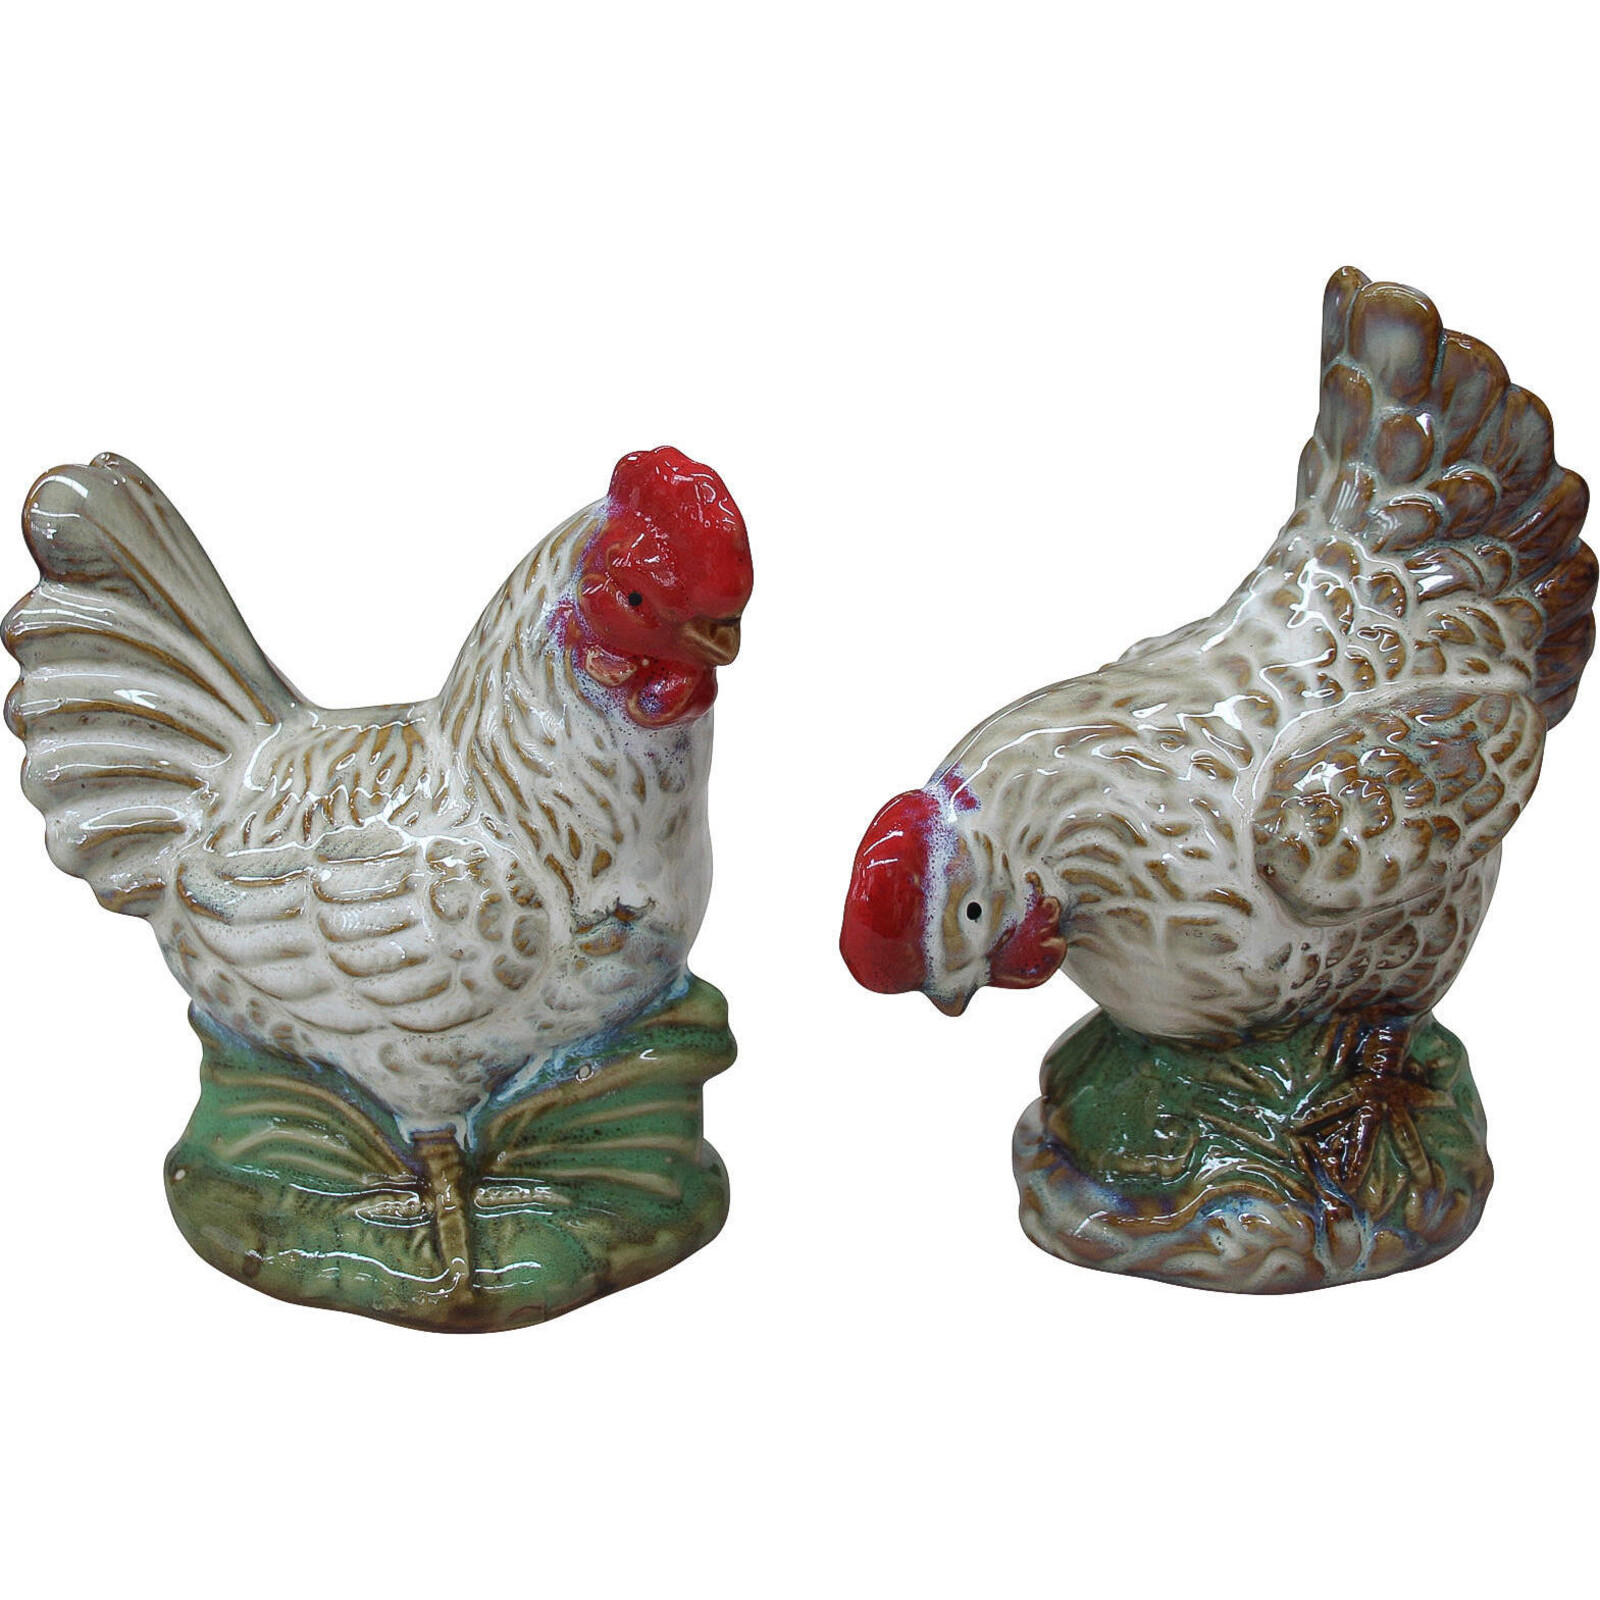 Chicken & Rooster S/2